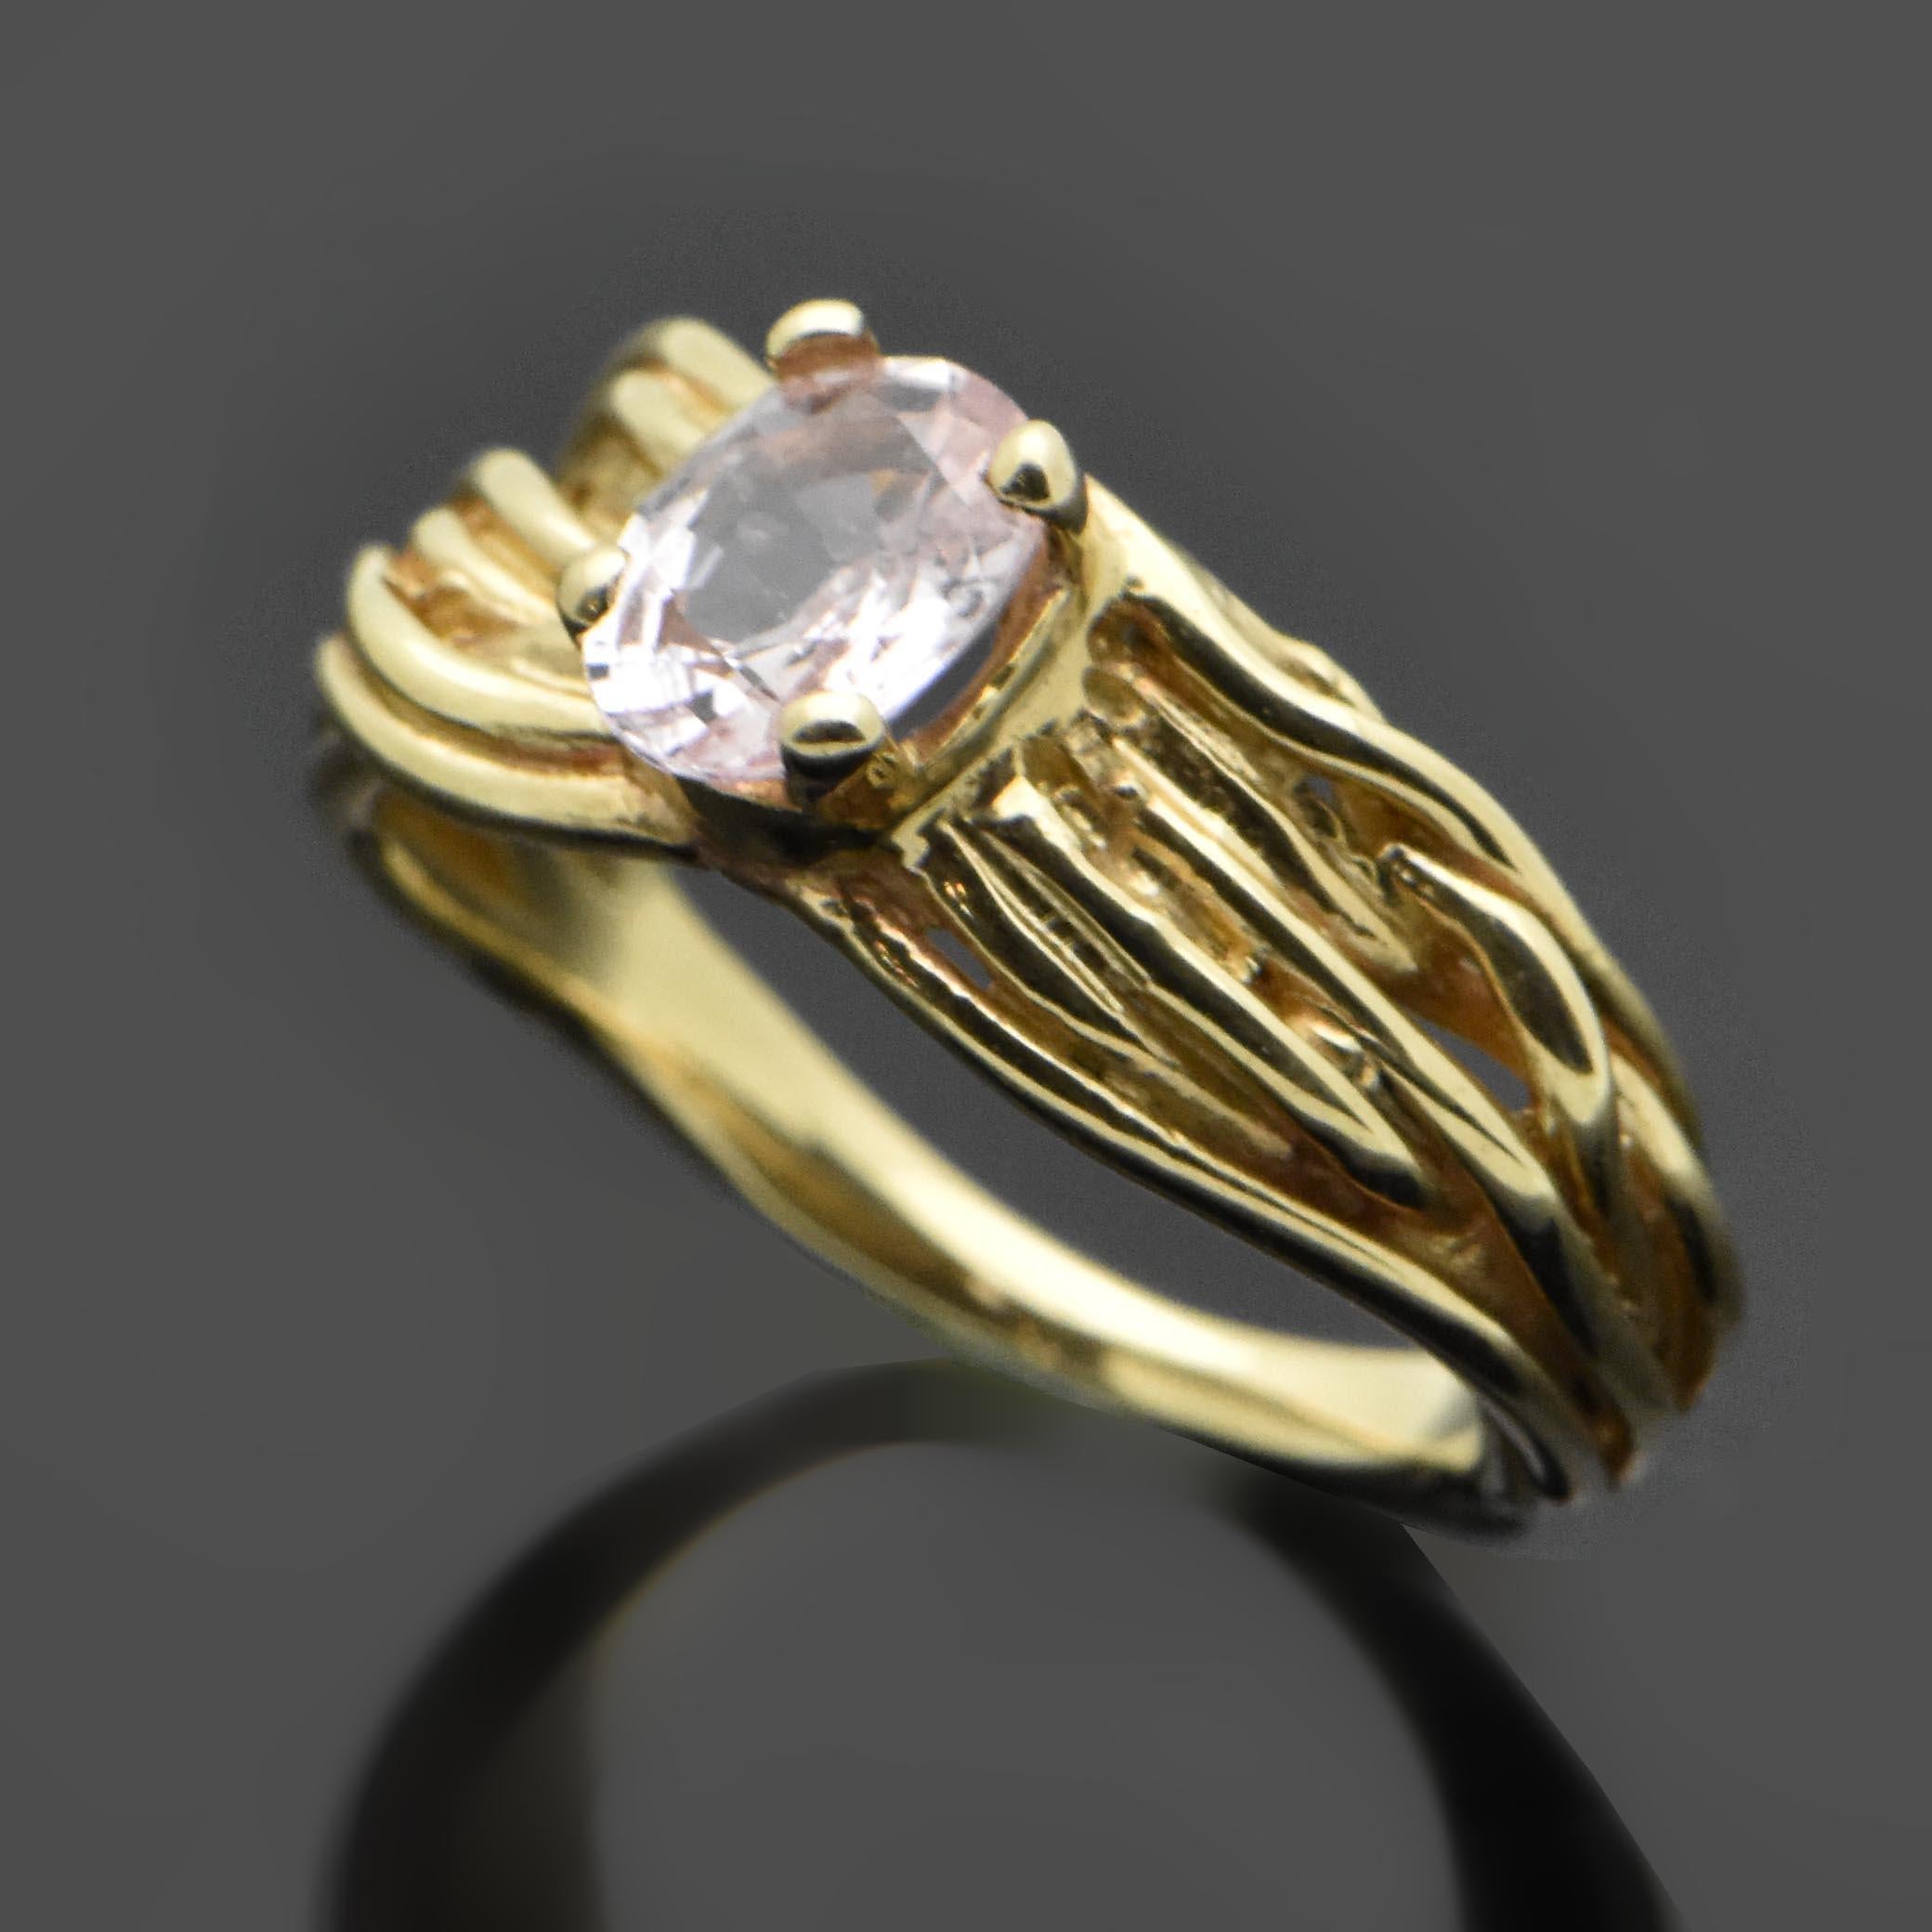 This 14kt yellow gold ring is set with an oval-cut pink sapphire estimated weight at 1.10ct and features a branch-like ring design. Estimated weight of gold is 3.5 gr. 

We will size it for you.

